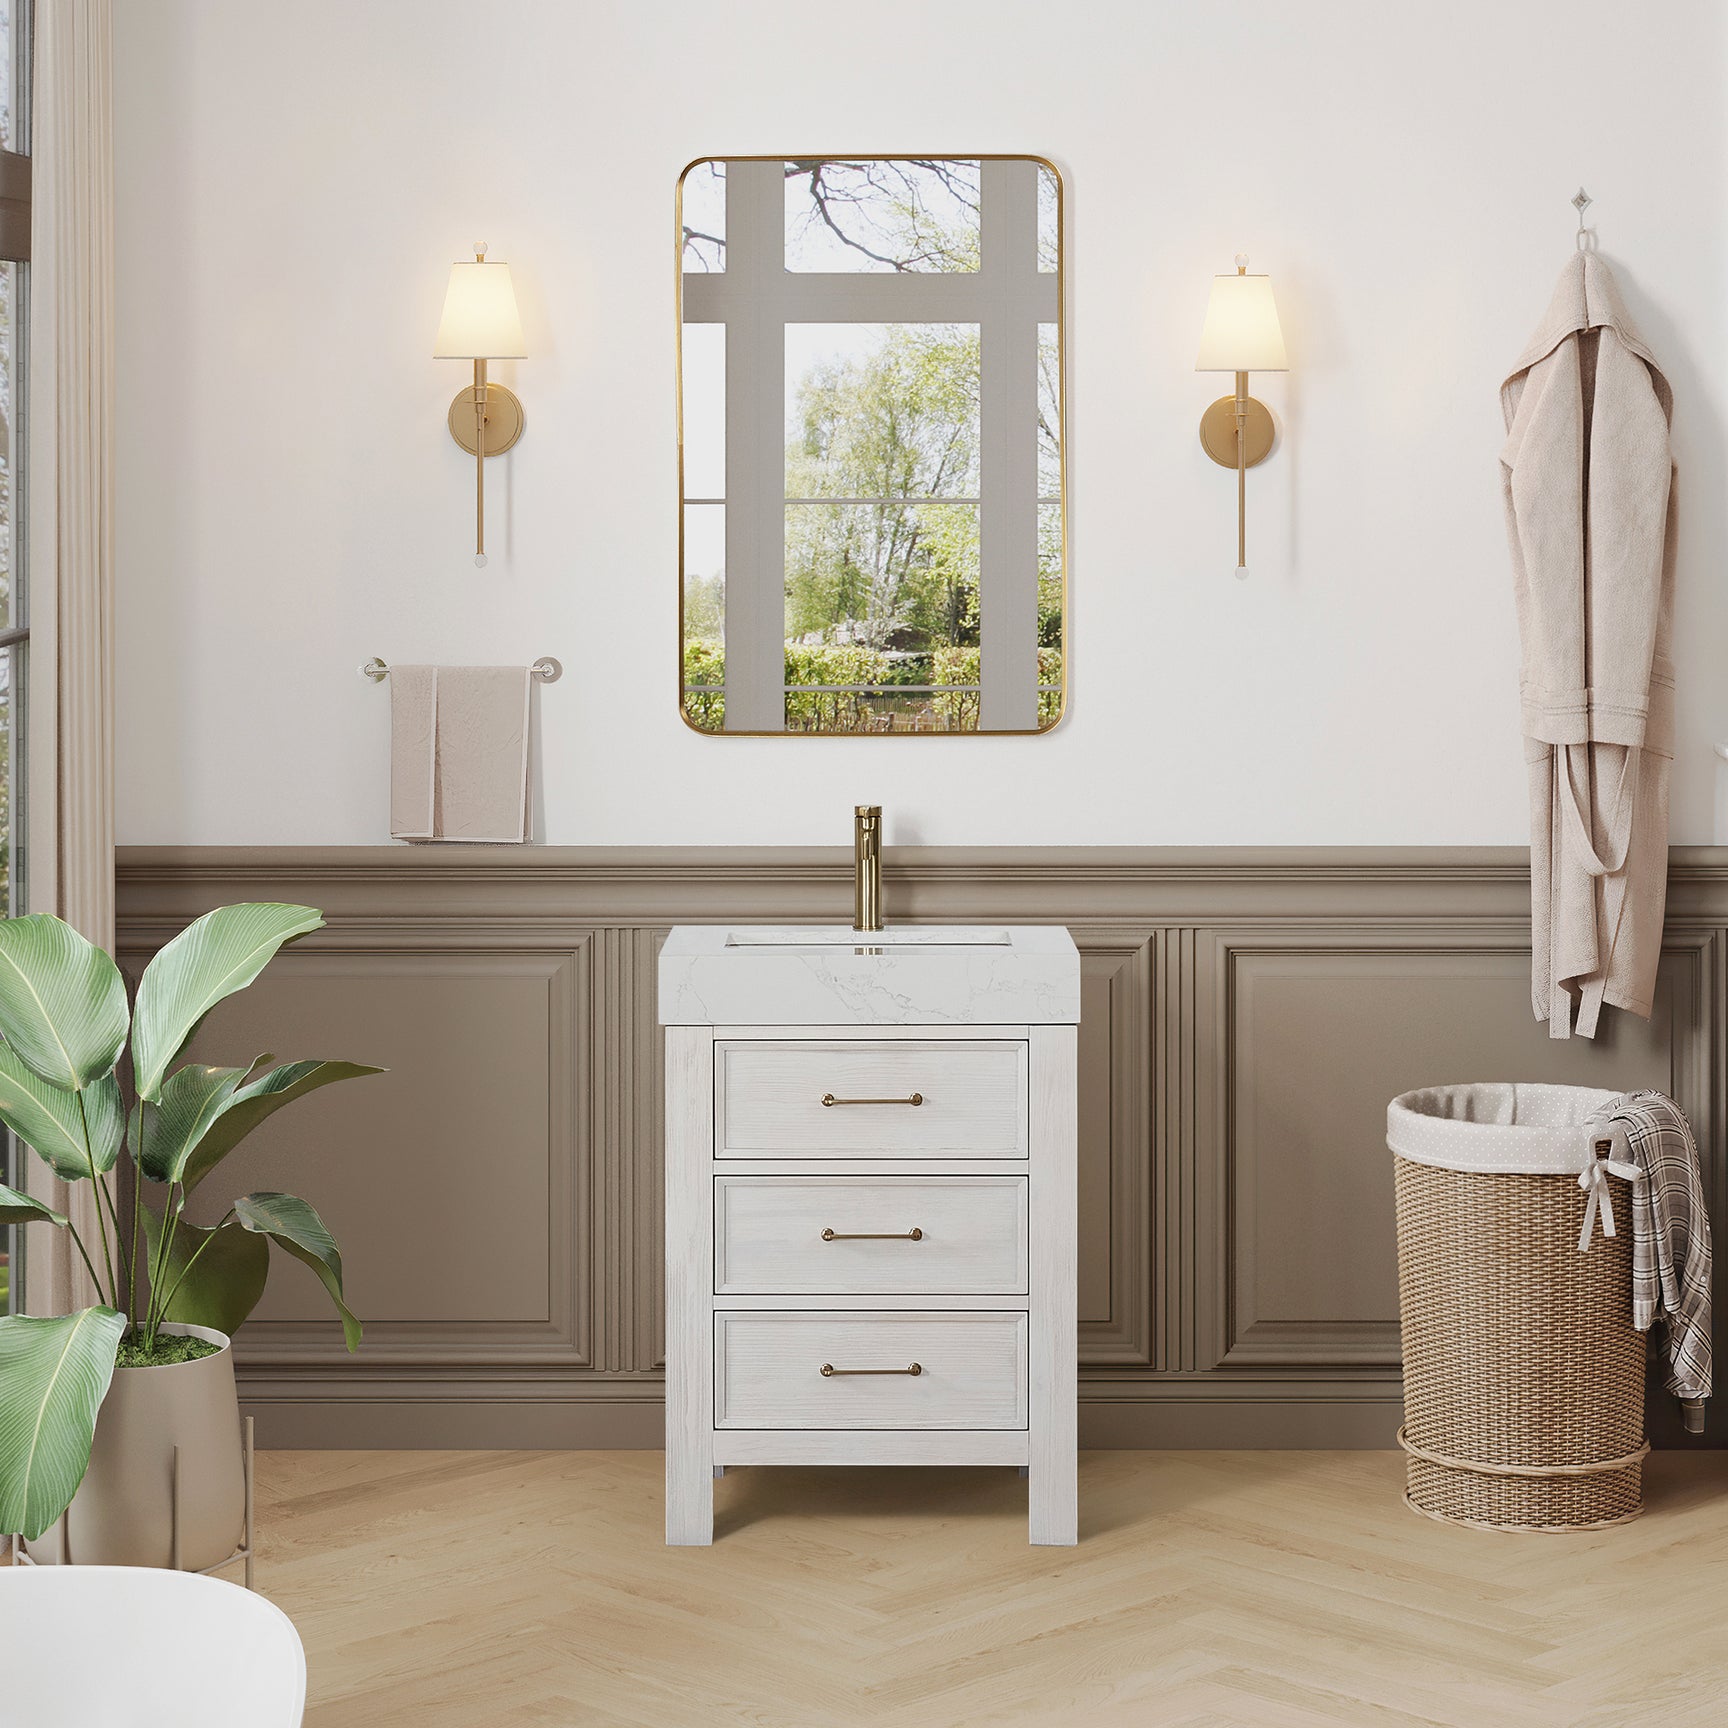 Issac Edwards 24in. Free-standing Single Bathroom Vanity in Washed White with Composite top in Lightning White and Mirror